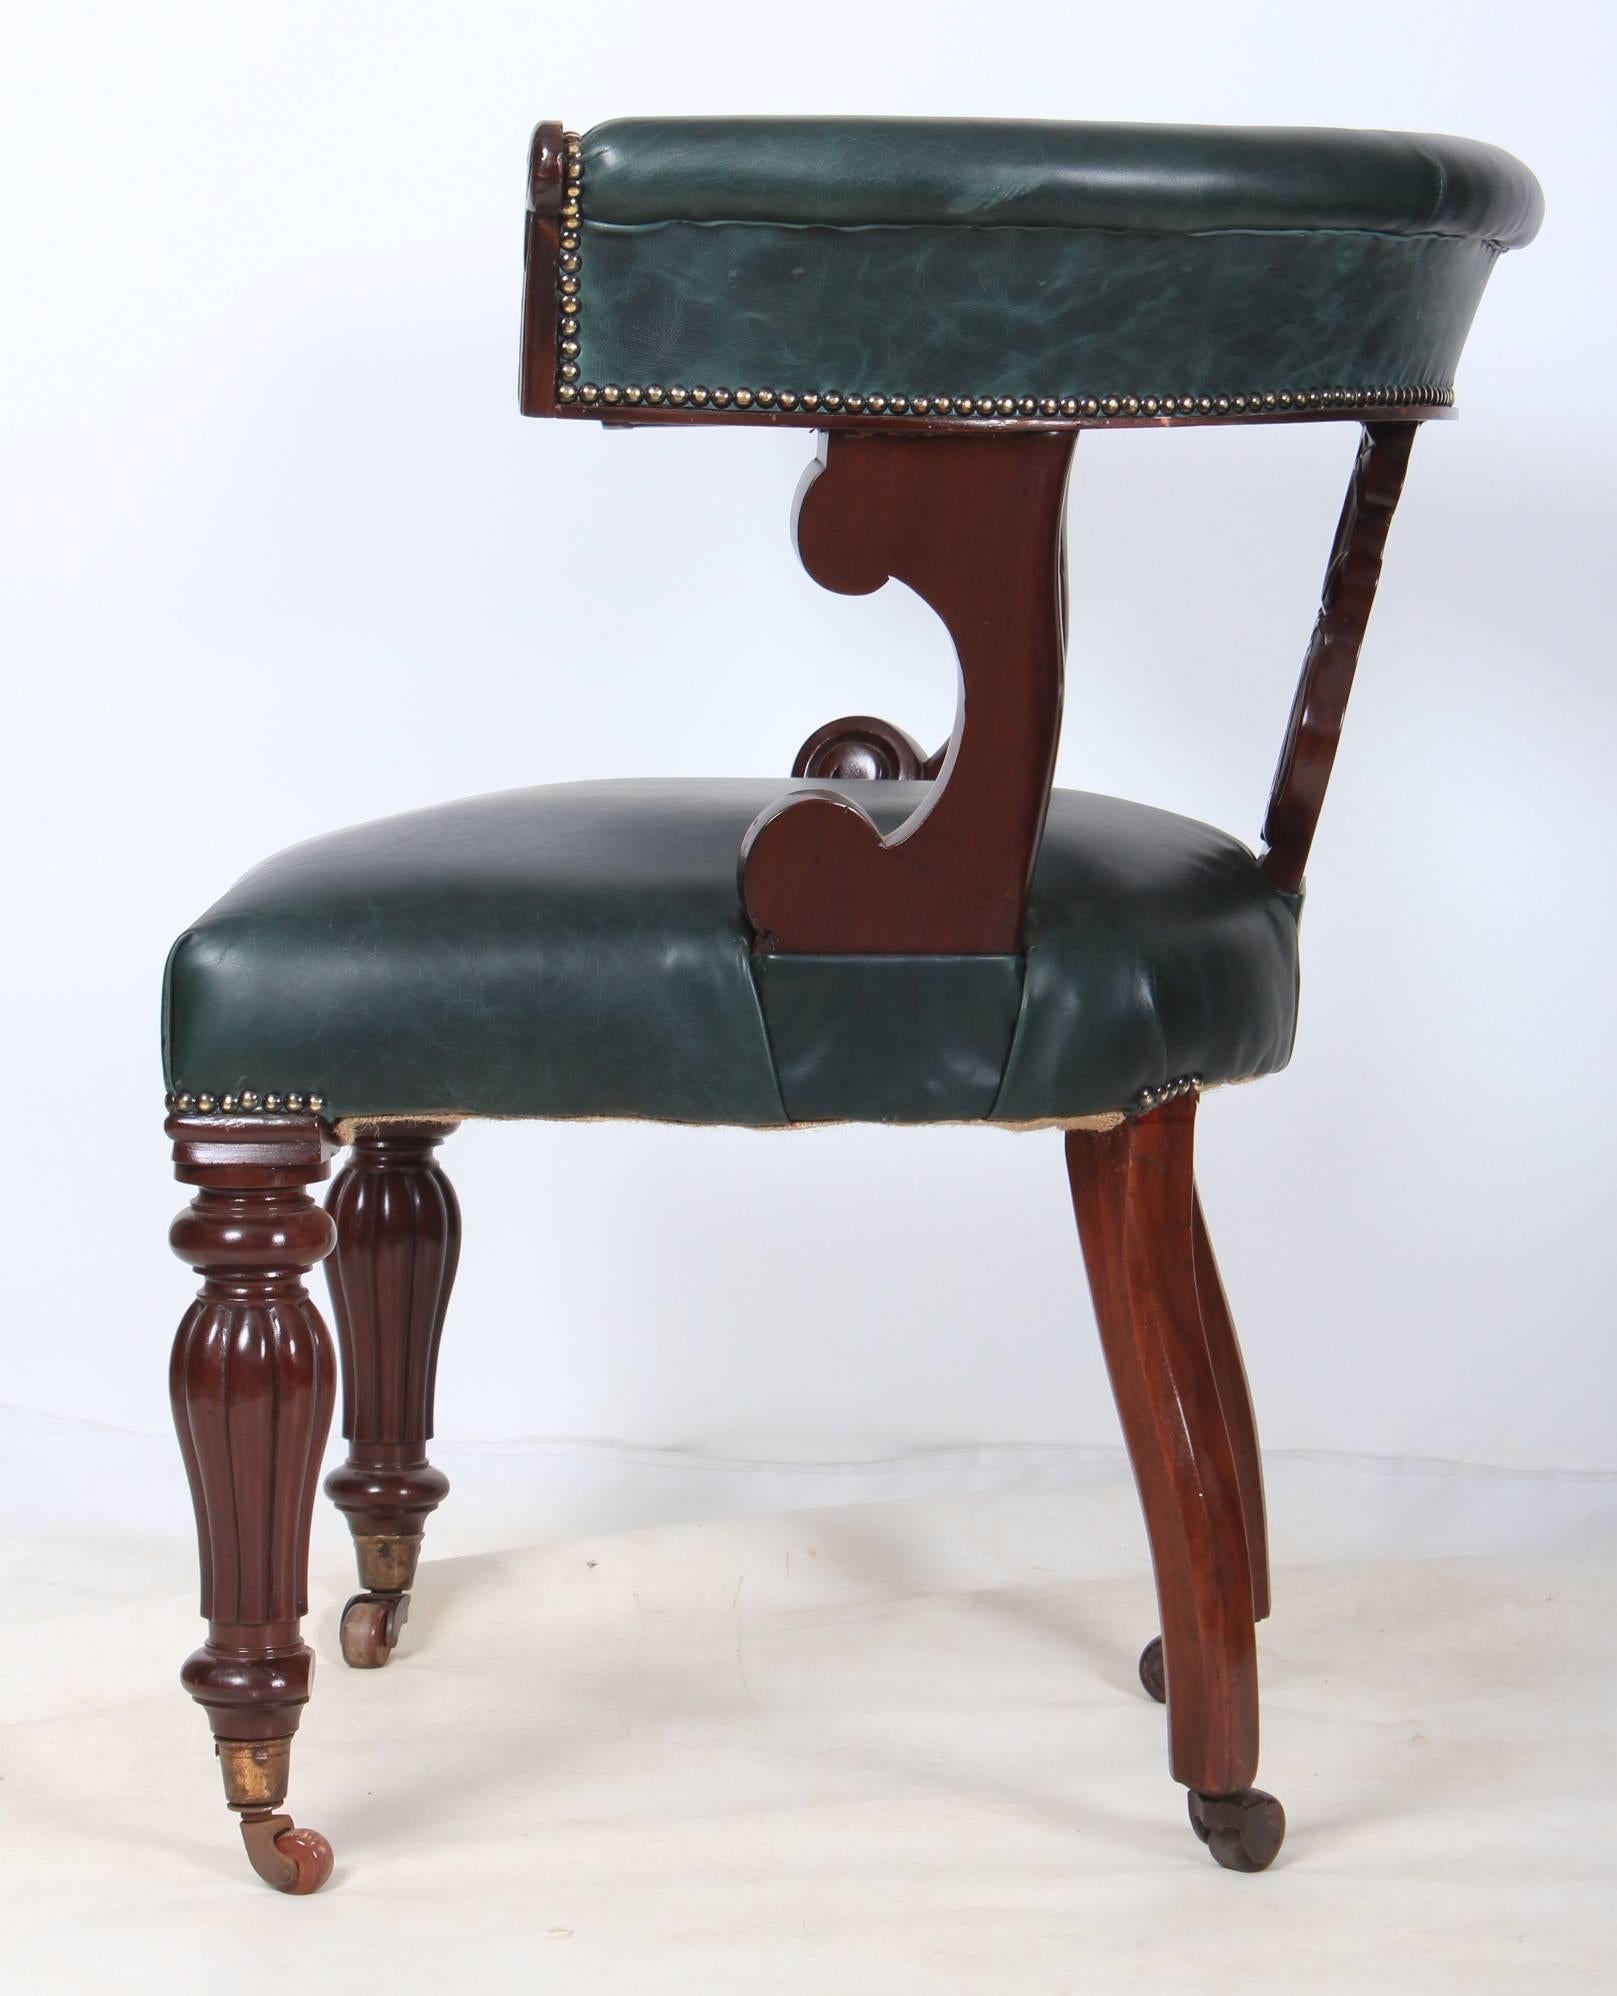 Mid-19th Century Victorian Mahogany and Leather Office Desk Chair